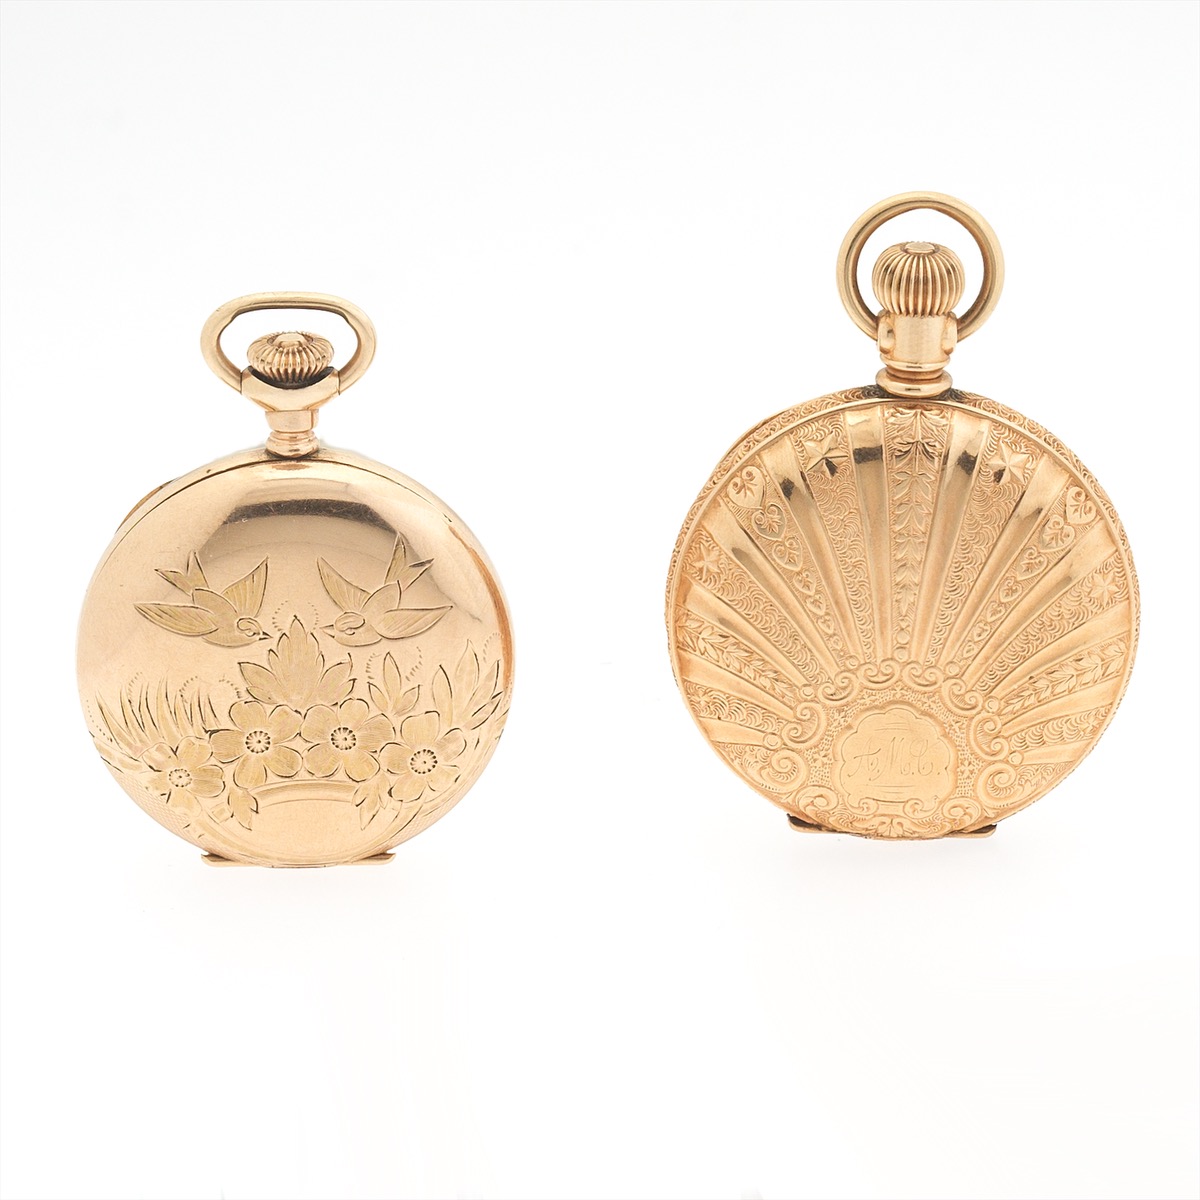 Two "O" Size Ladies Pendant Watches - Image 4 of 11